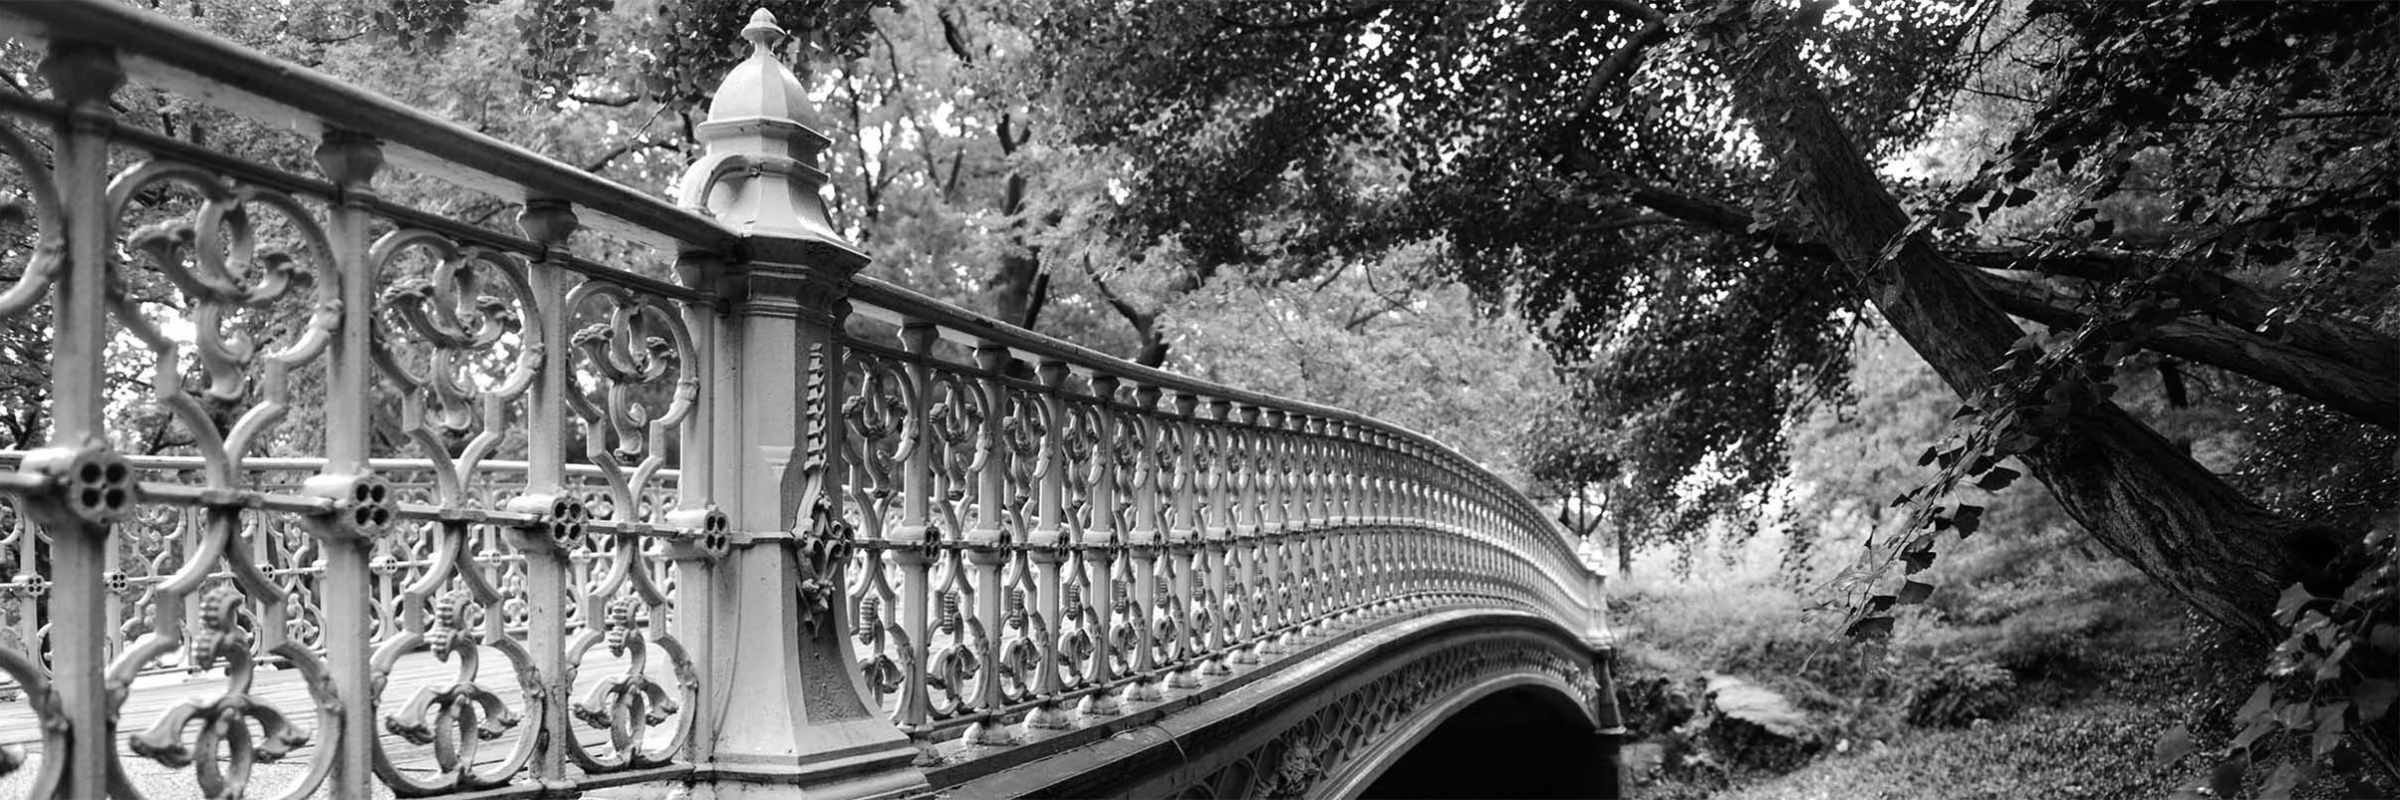 Pine Bank Arch in Central Park, NYC